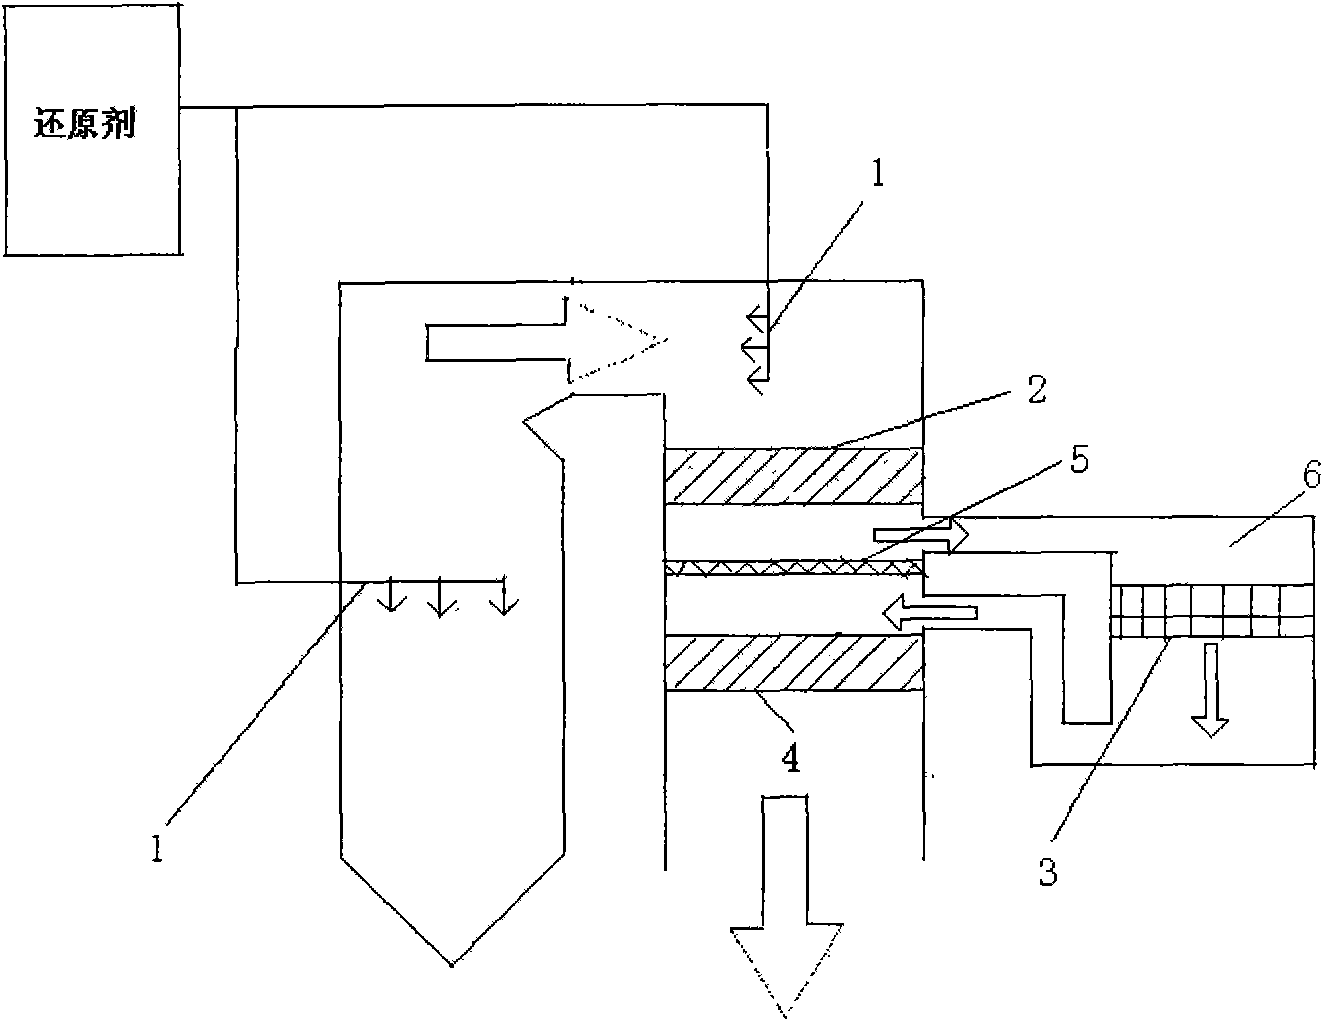 Device and method for denitration on flue gas by coupling selective non catalytic reduction and catalytic reduction